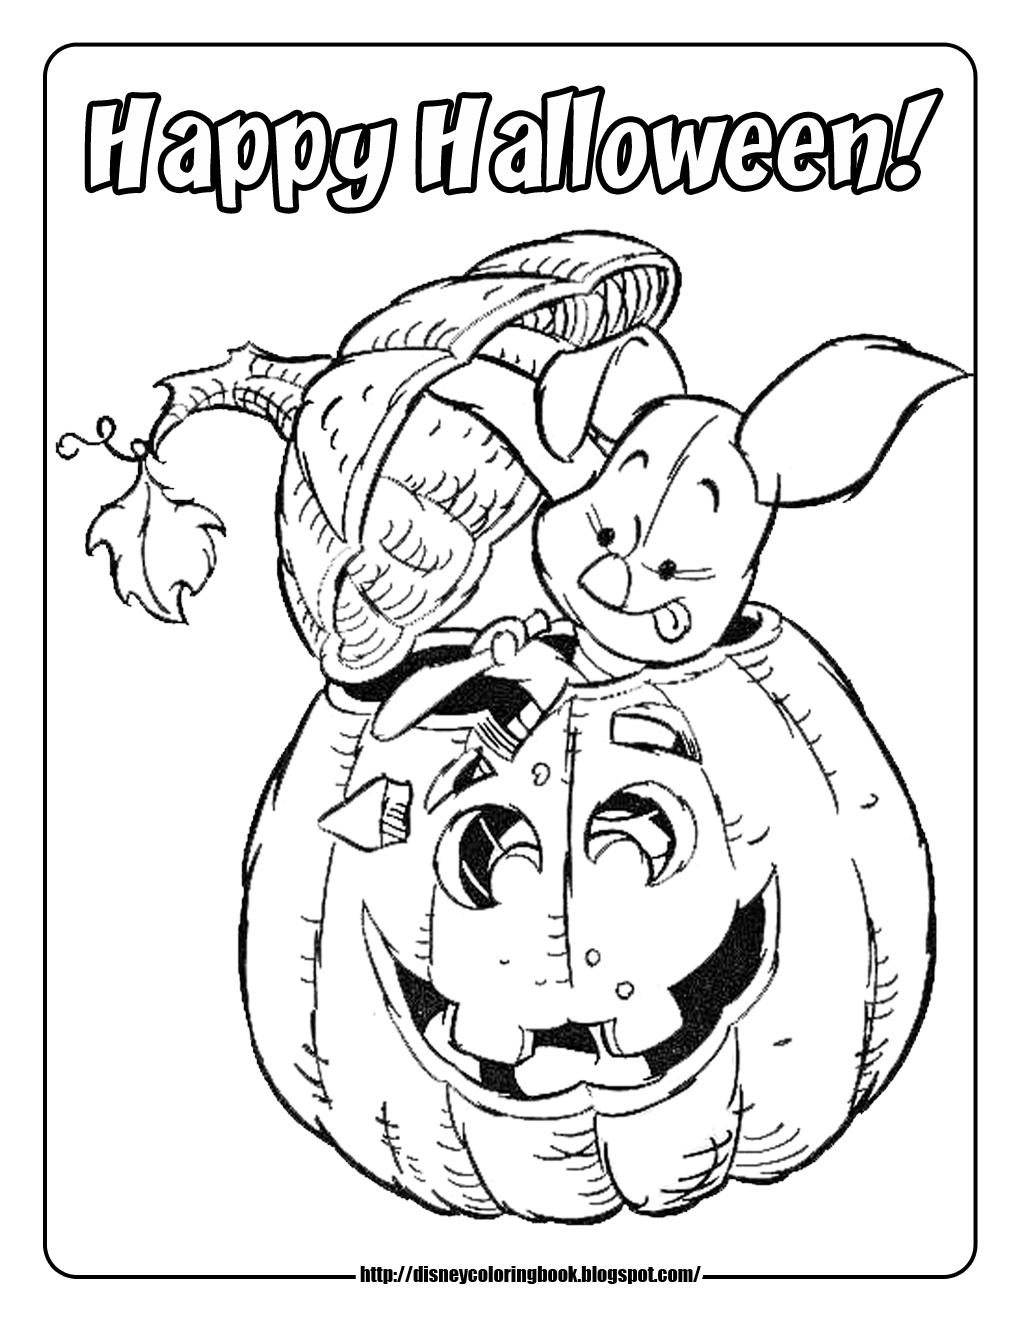 Download Disney Coloring Pages and Sheets for Kids: Pooh and ...